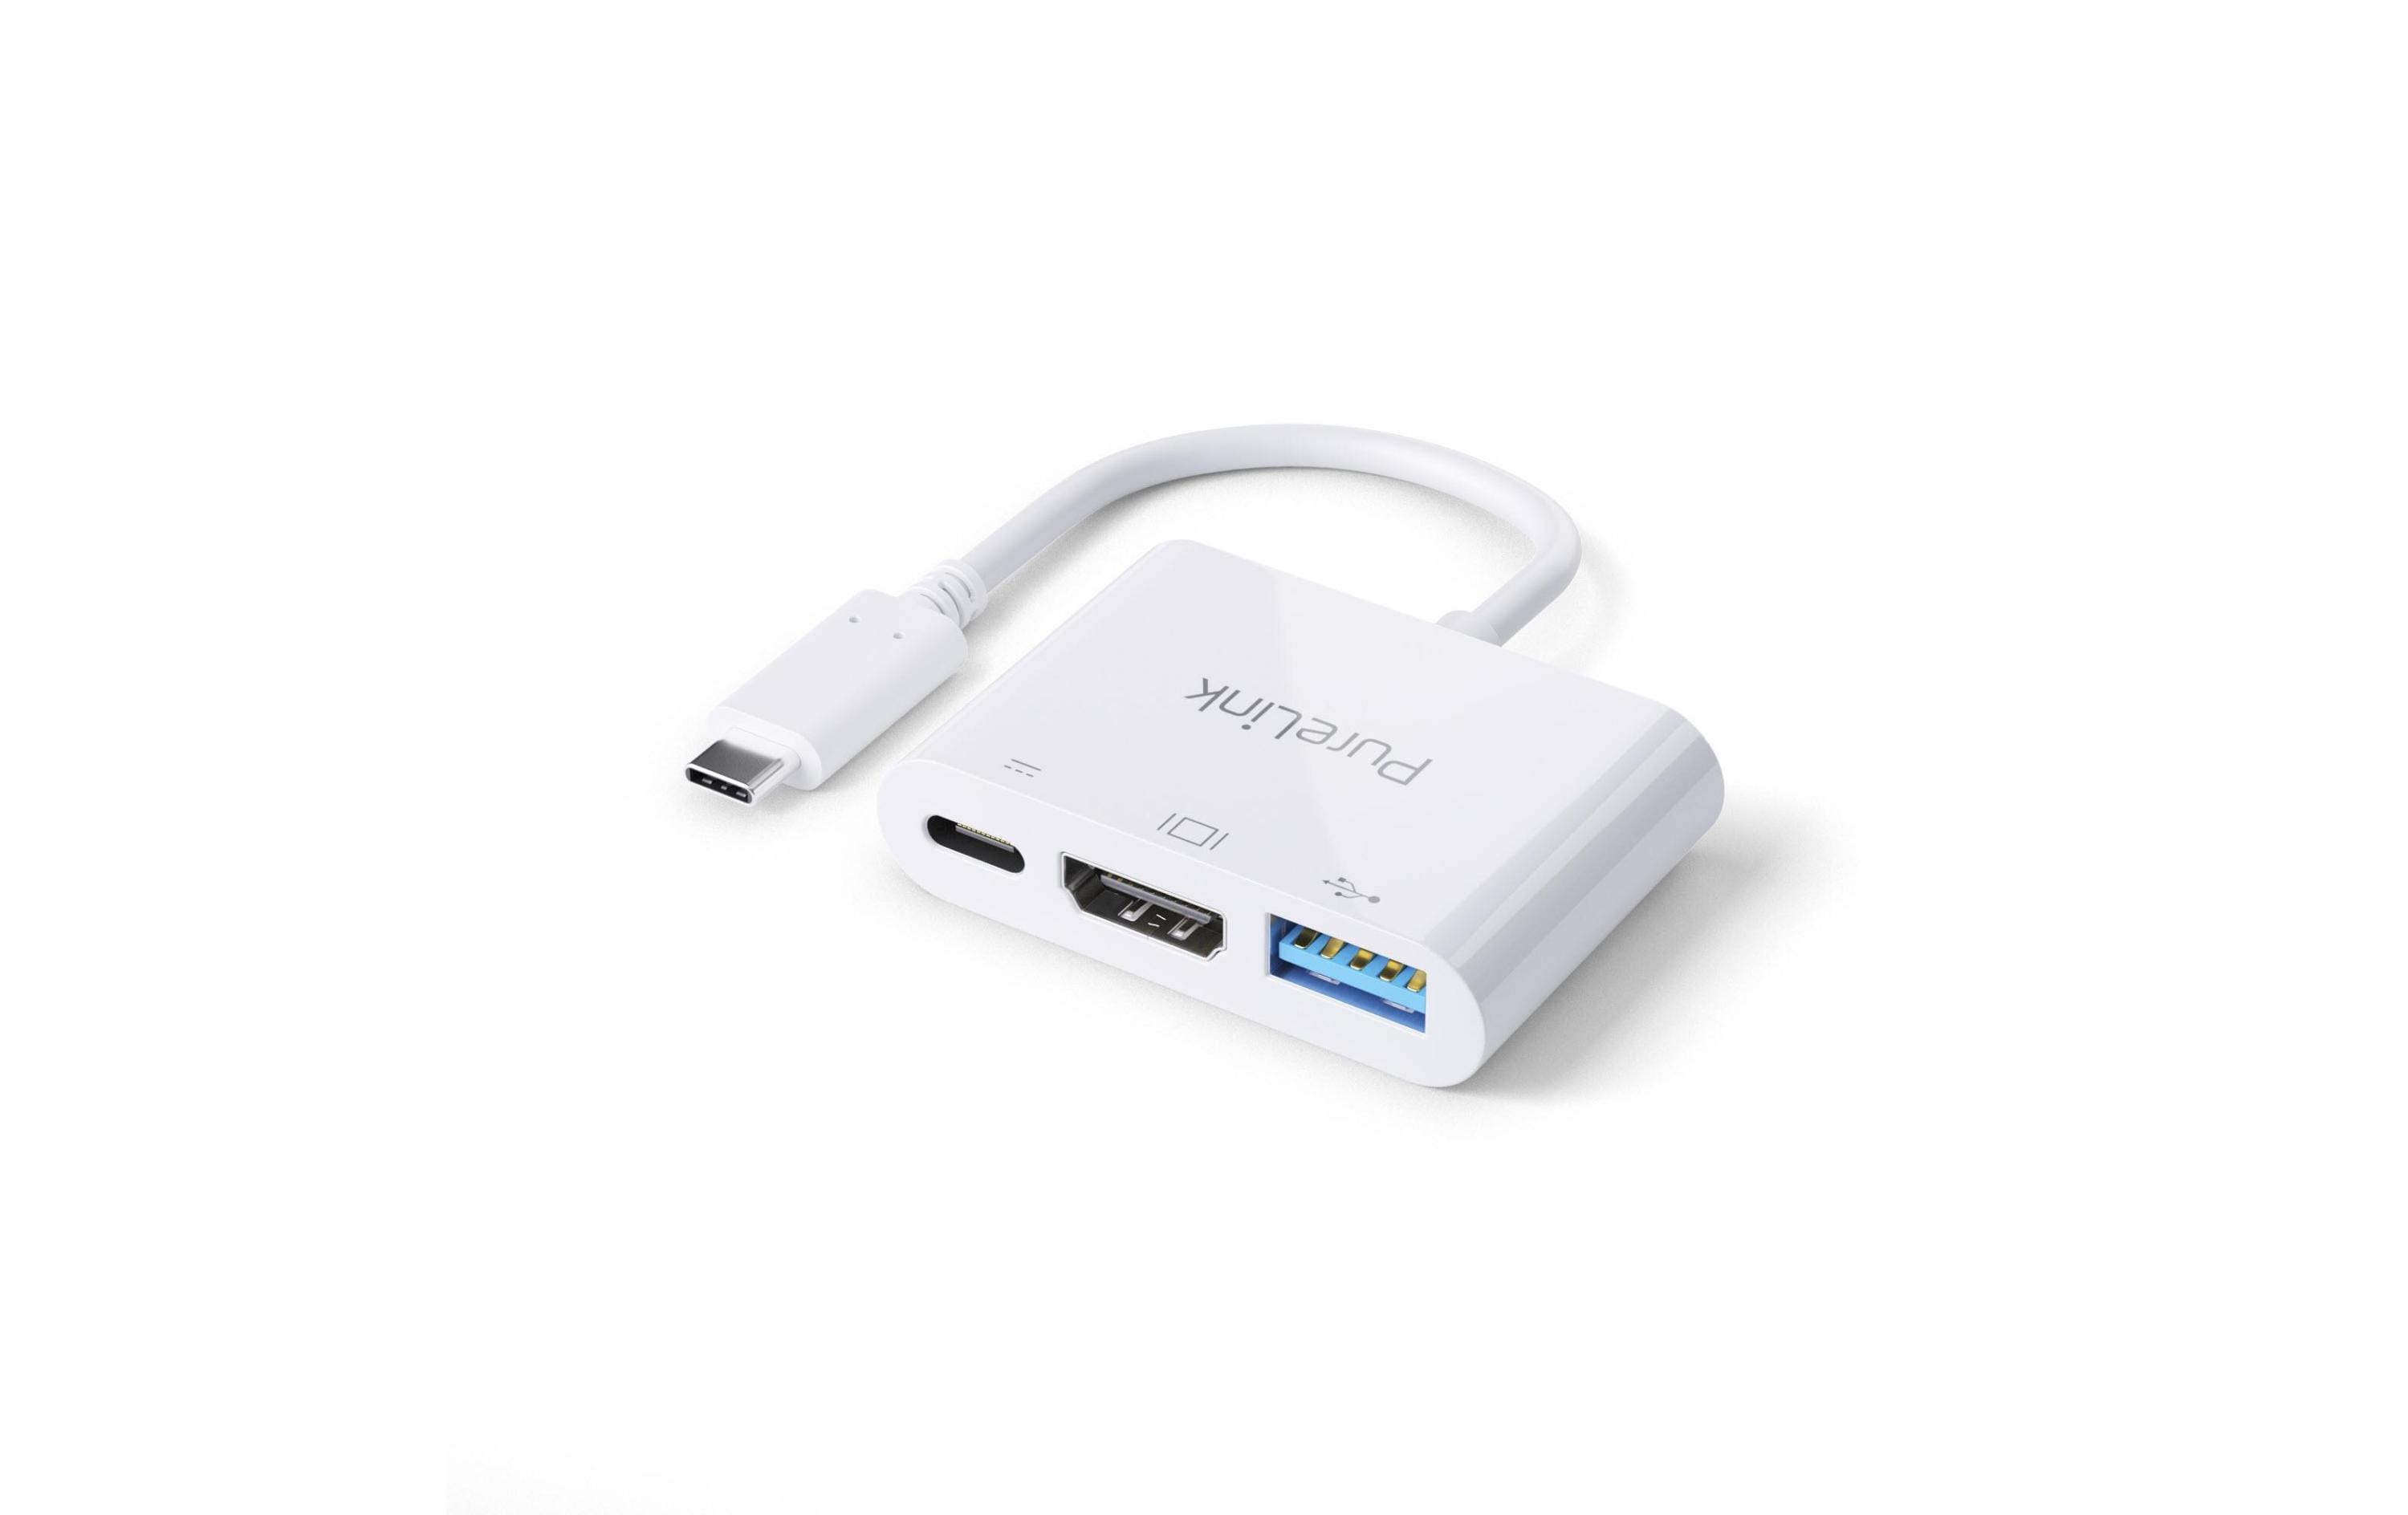 PureLink Multiport Adapter IS270 USB-C - HDMI & USB-A3.1, weiss